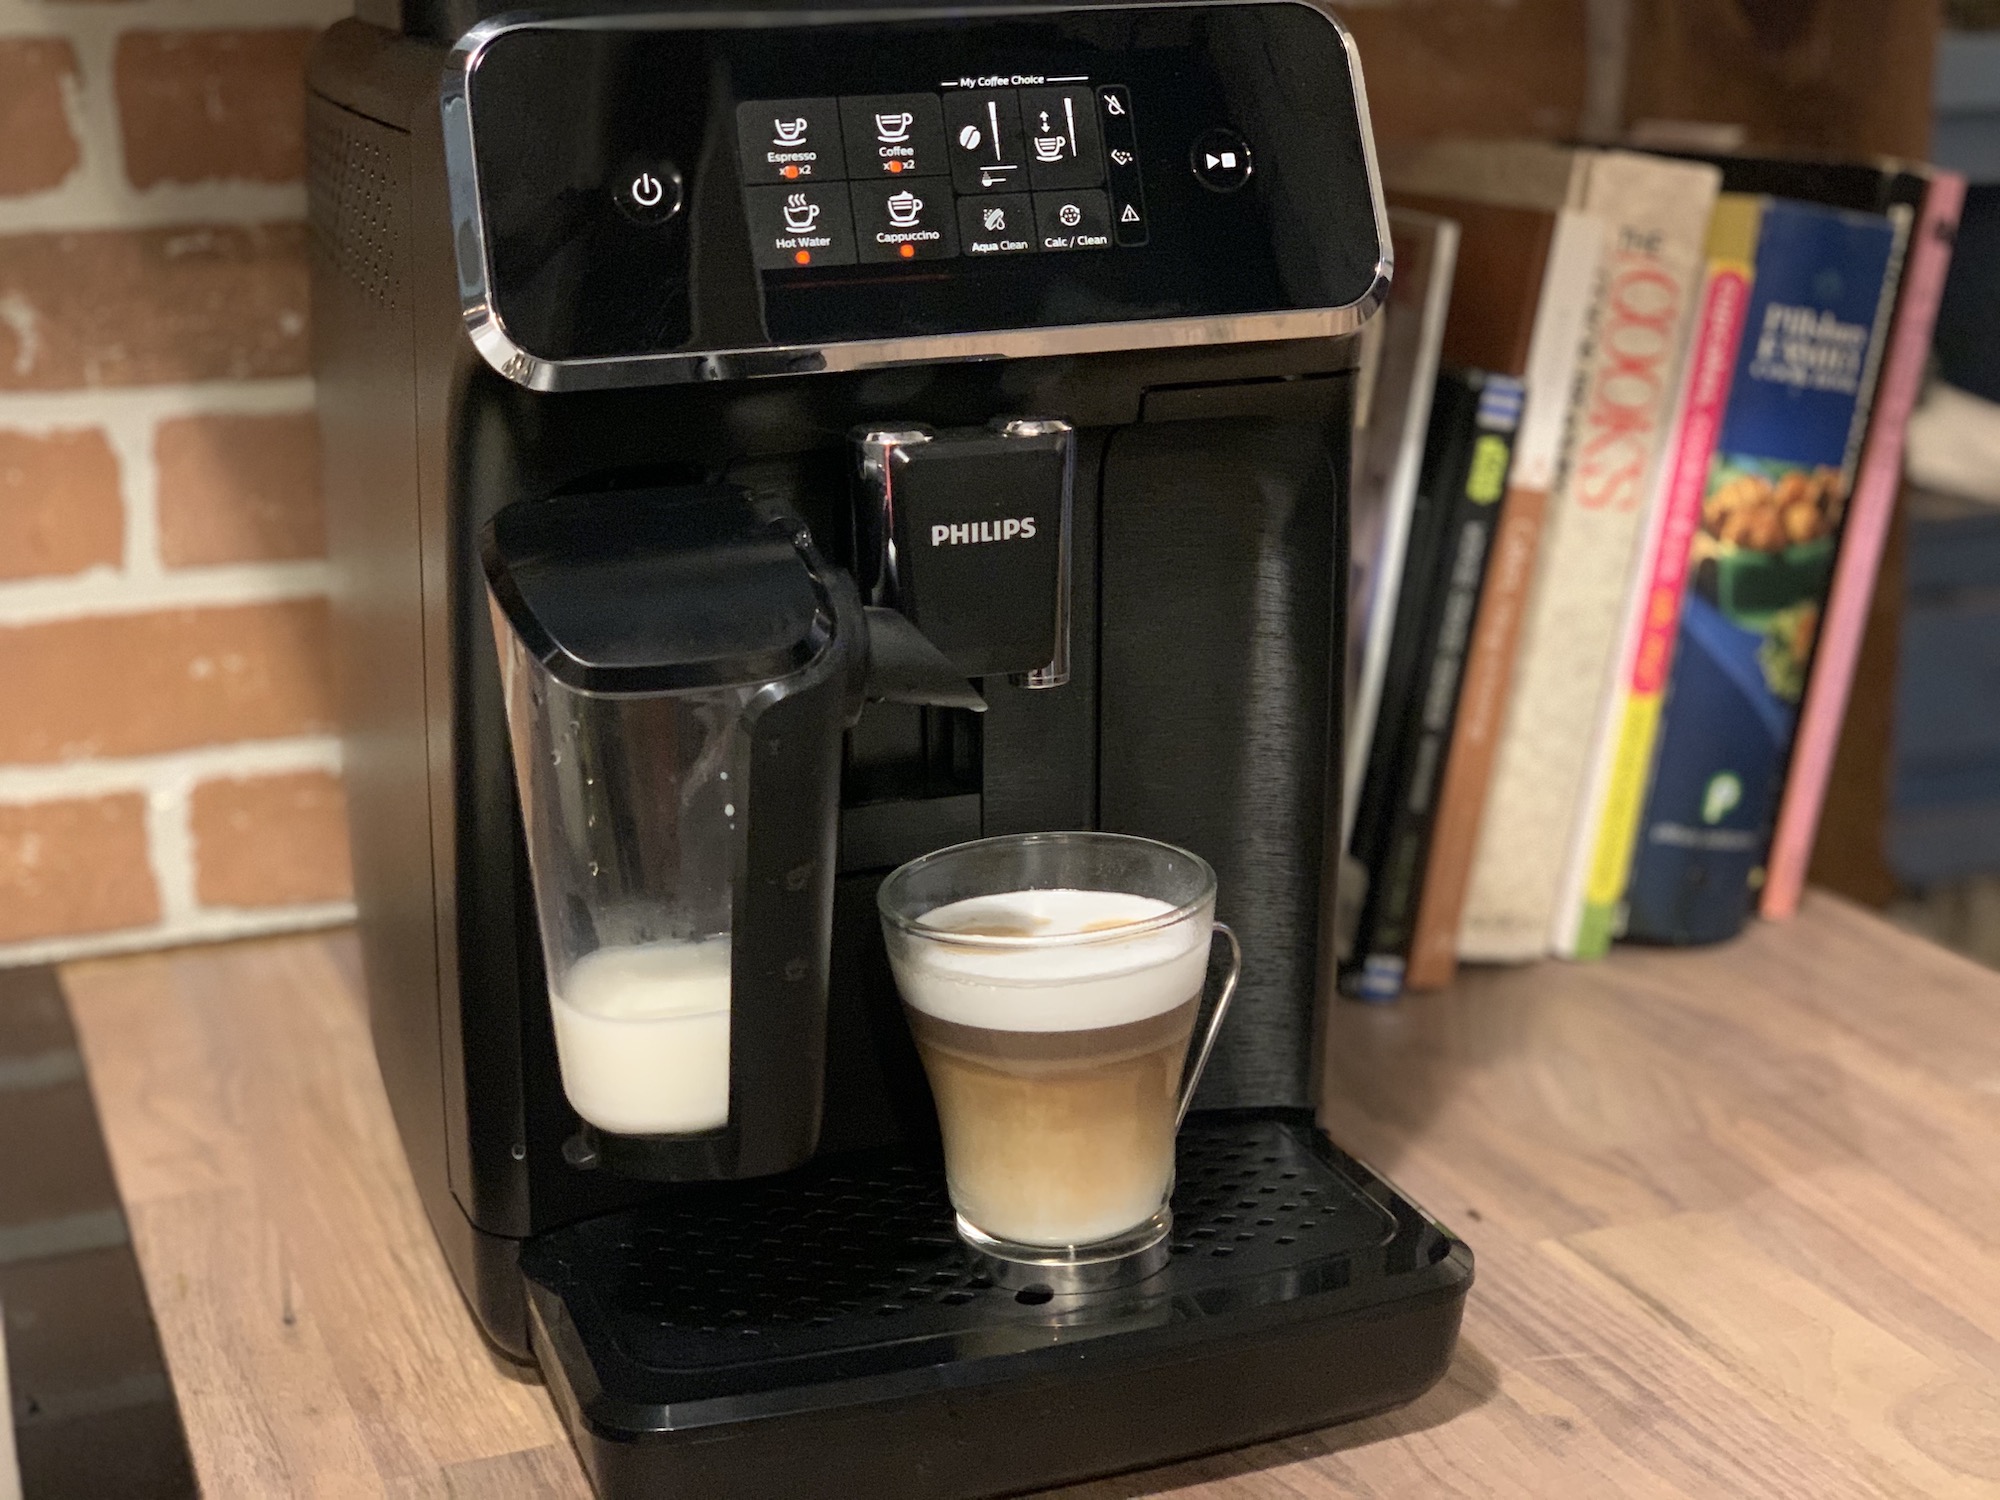 Philips 2200 automatic espresso machine with LatteGo milk frother review